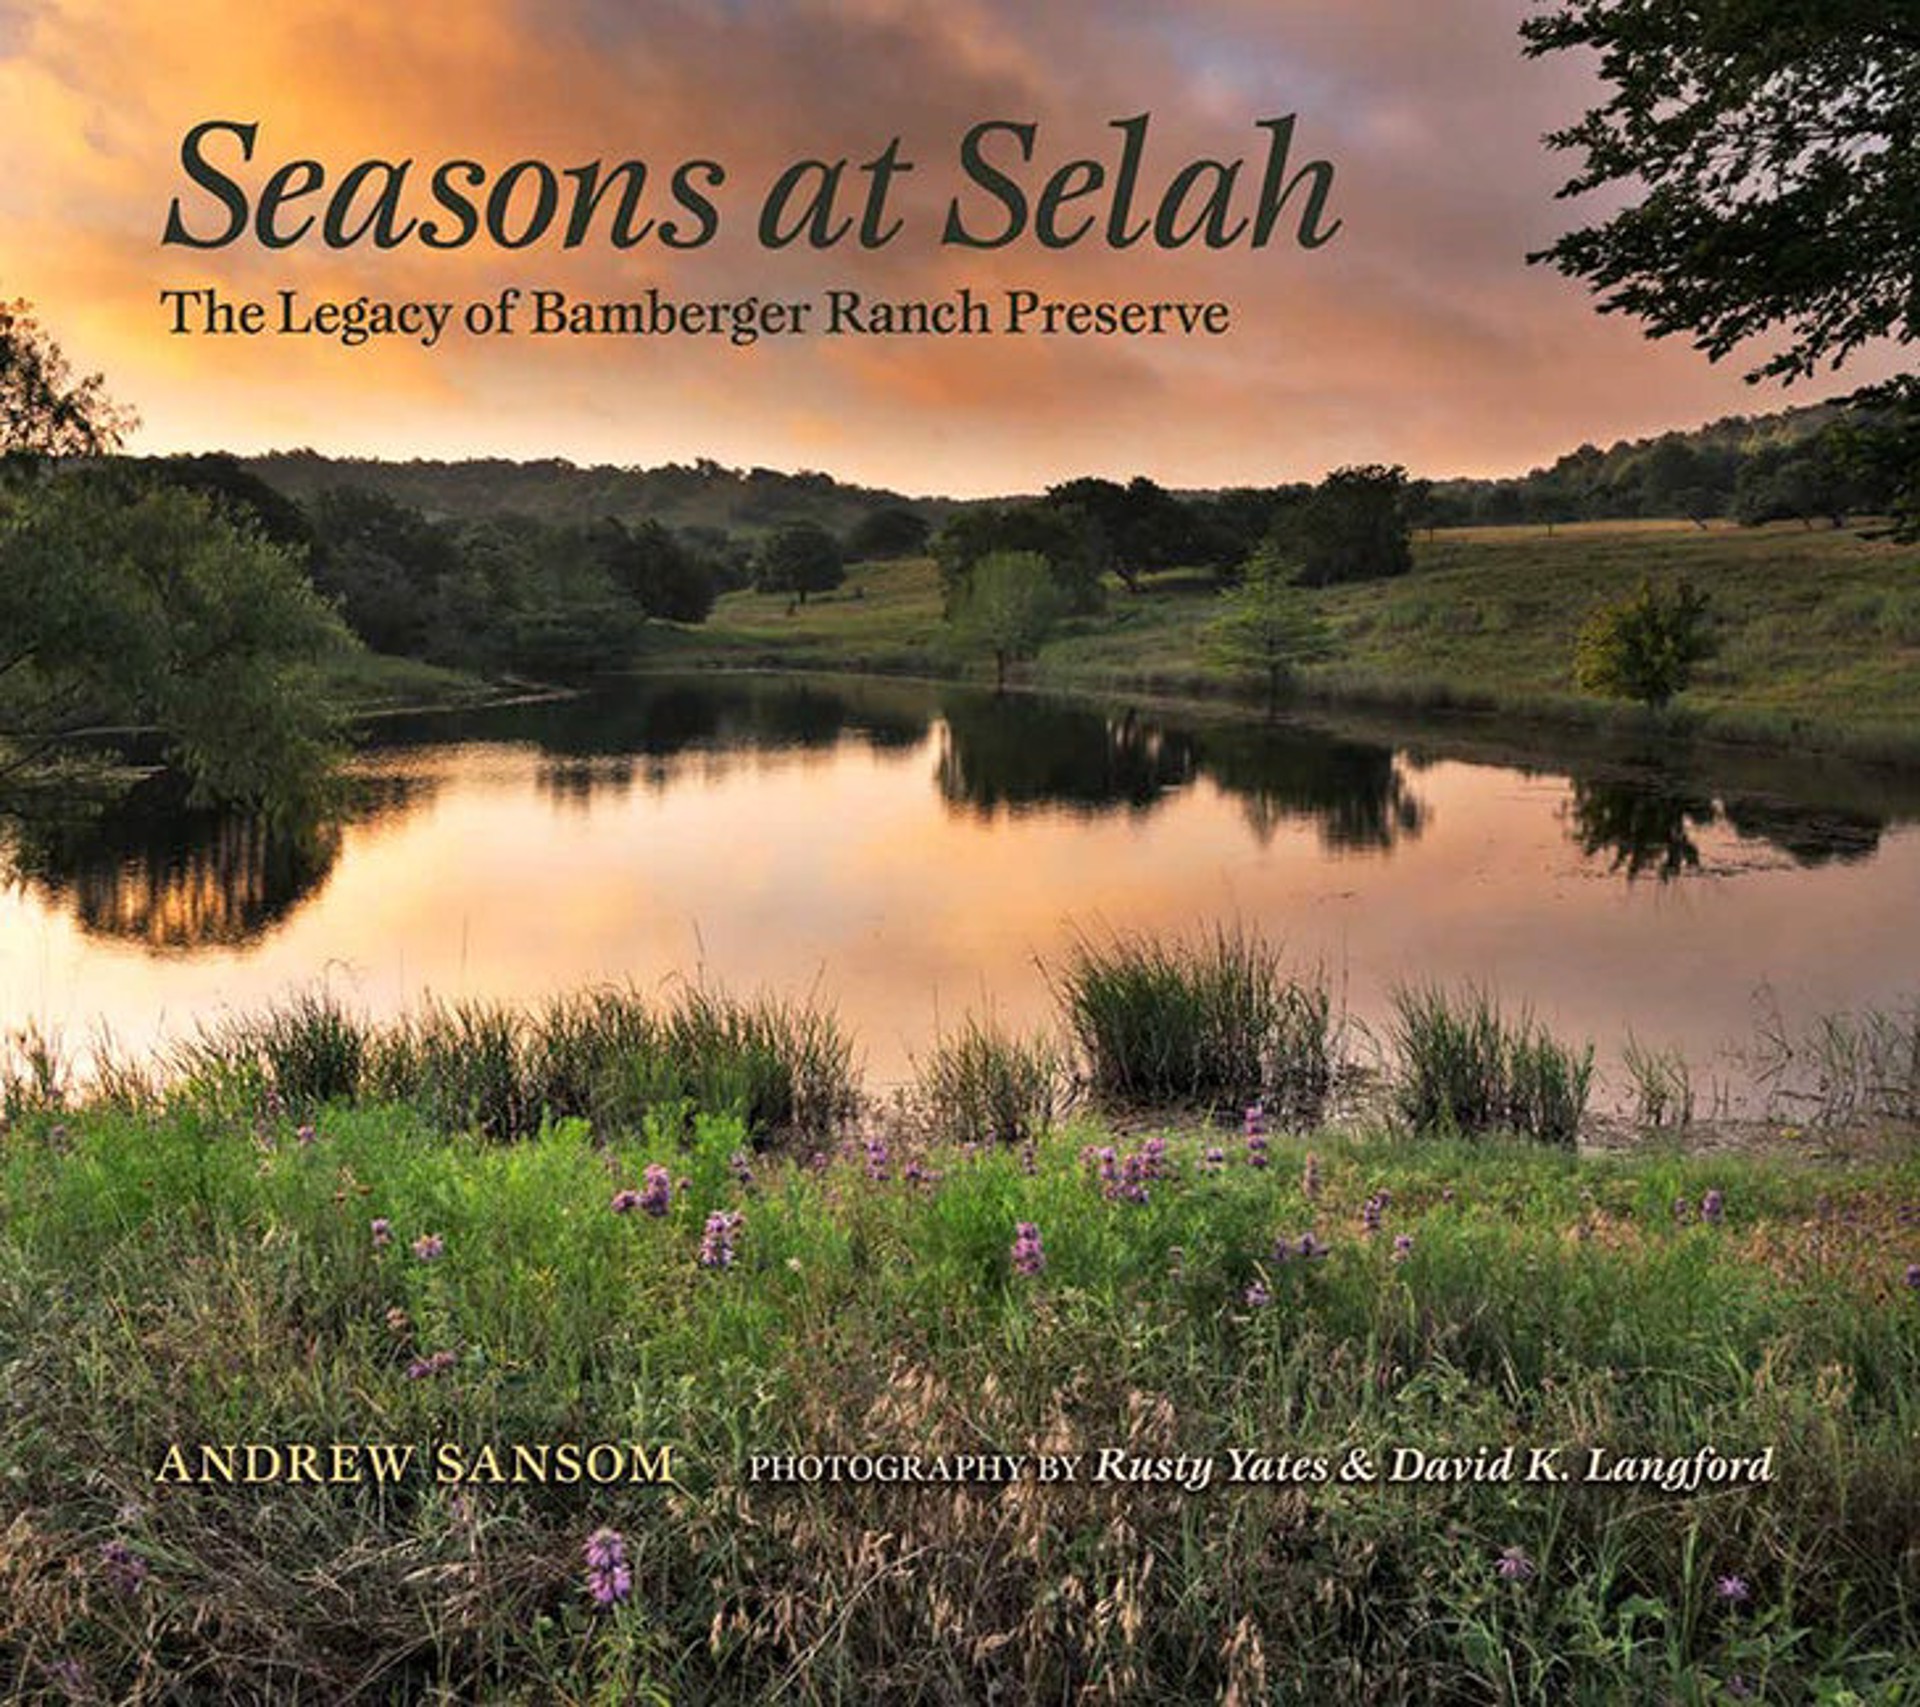 Seasons at Selah: The Legacy of Bamberger Ranch Preserve by Publications